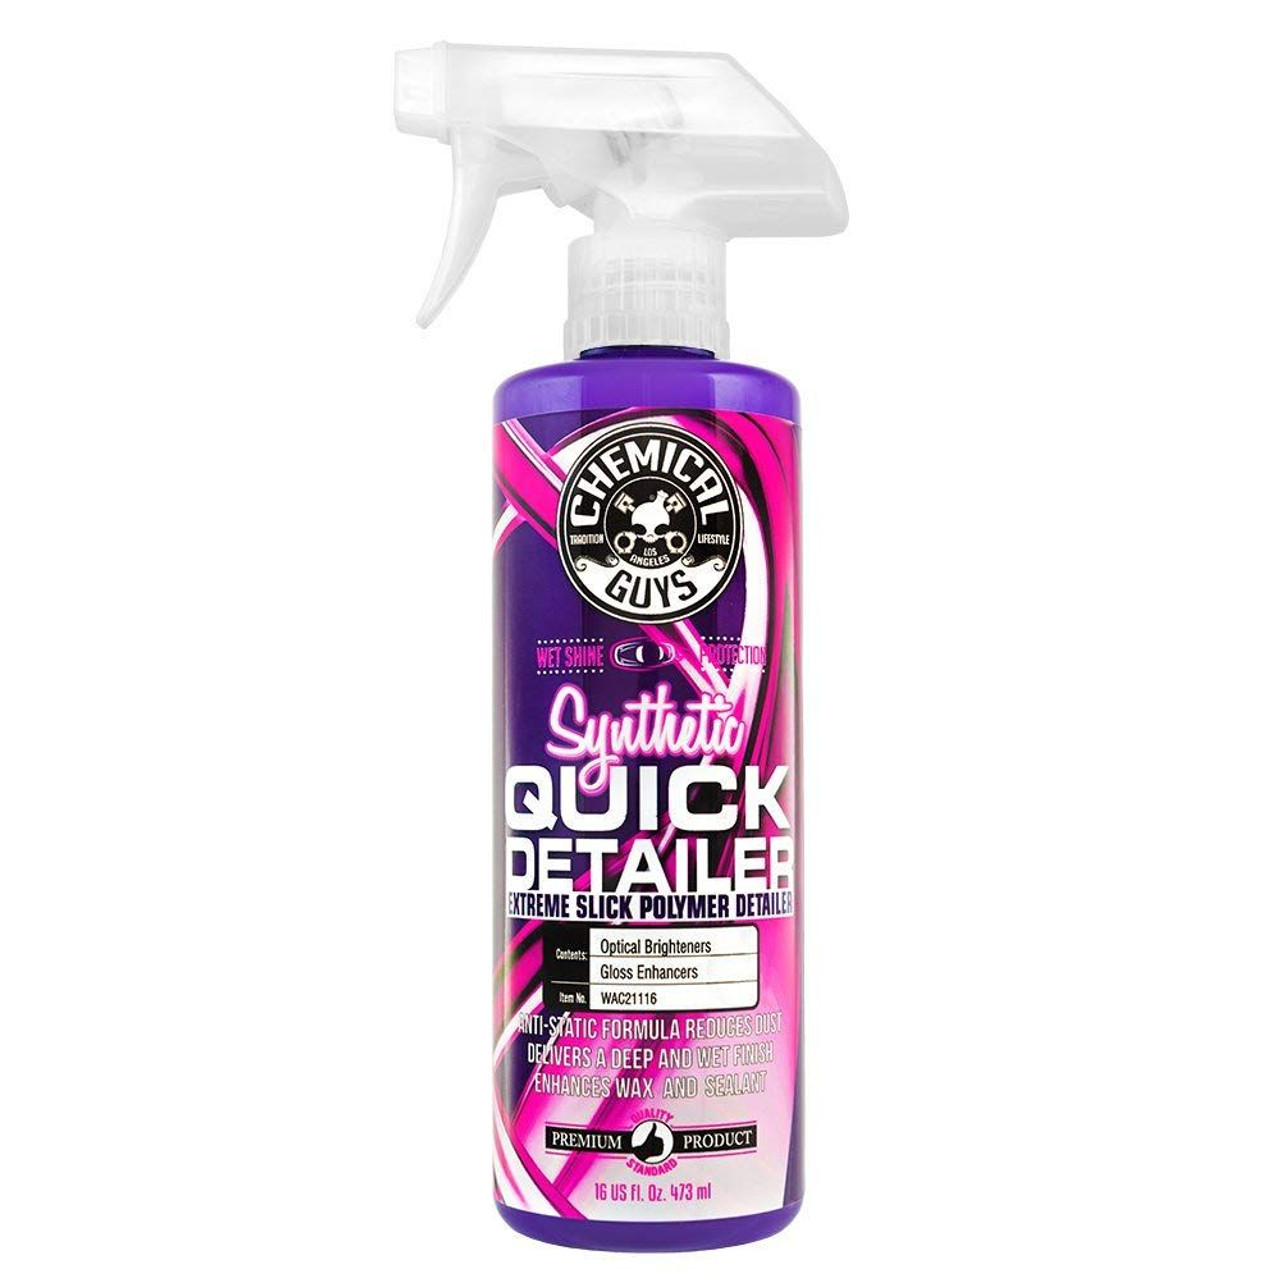 Safe to use on wrap?? S100 motorcycle detailer/cleaner.. : r/CarWraps